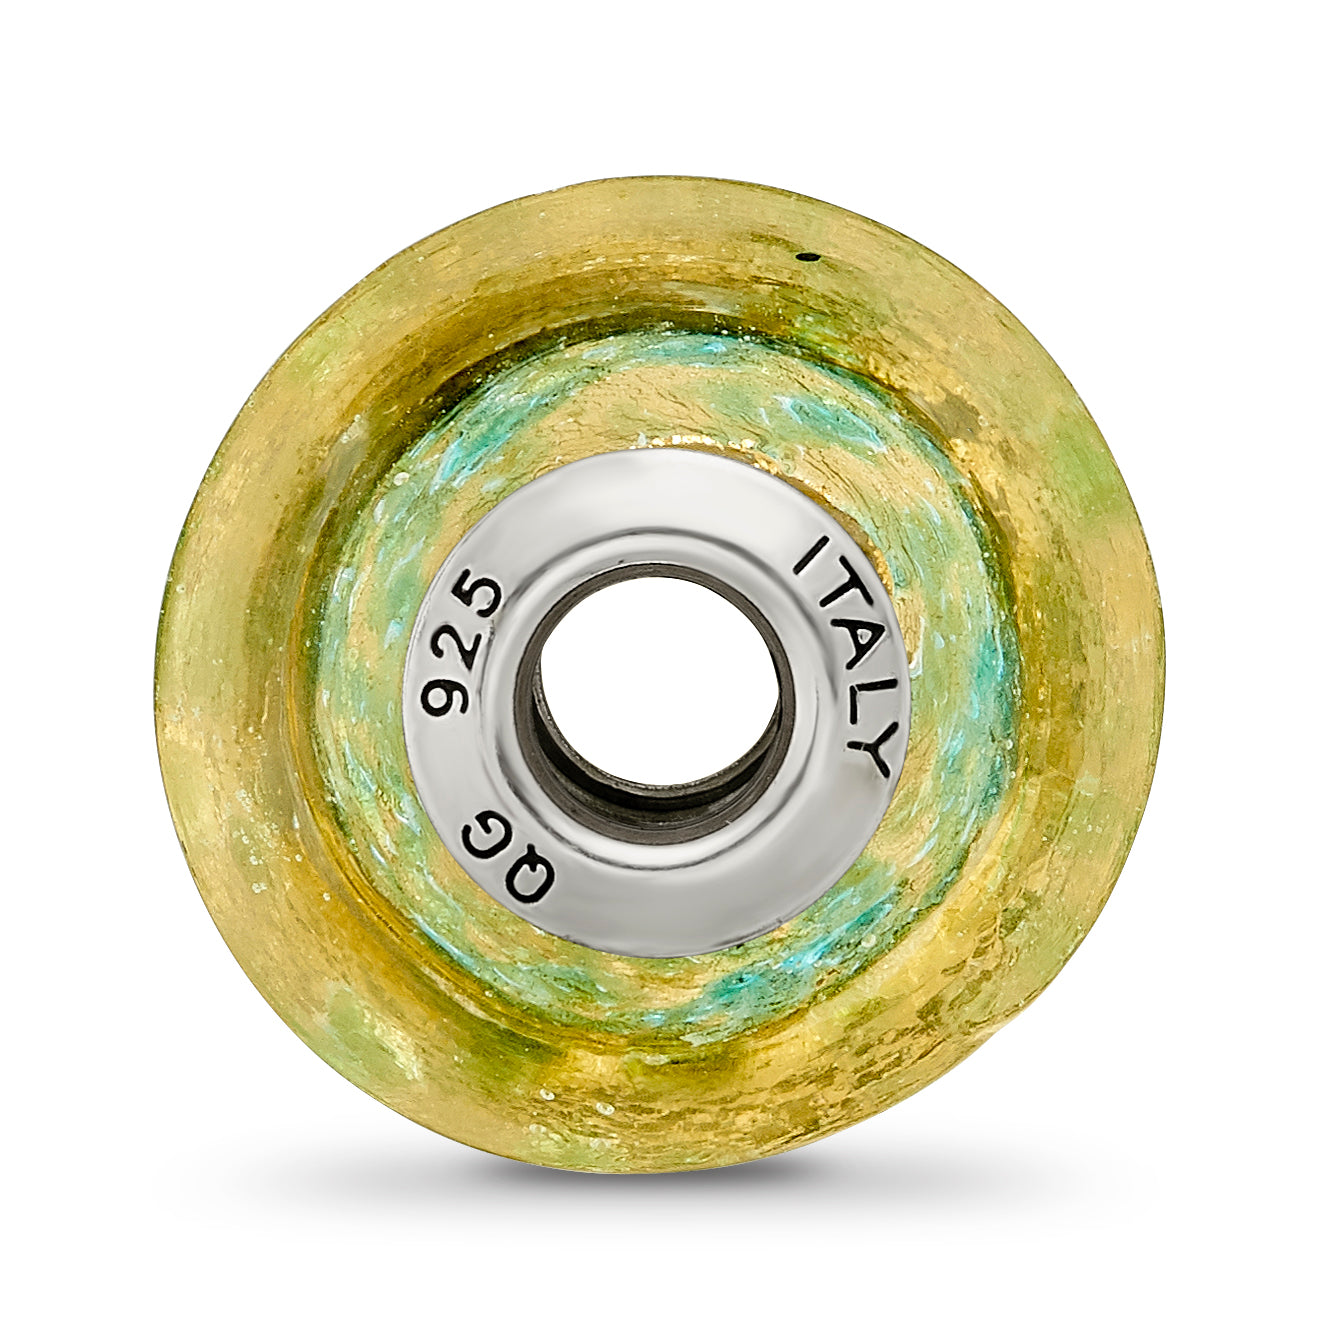 Sterling Silver Reflections Yellow/Teal Italian Murano Glass Bead